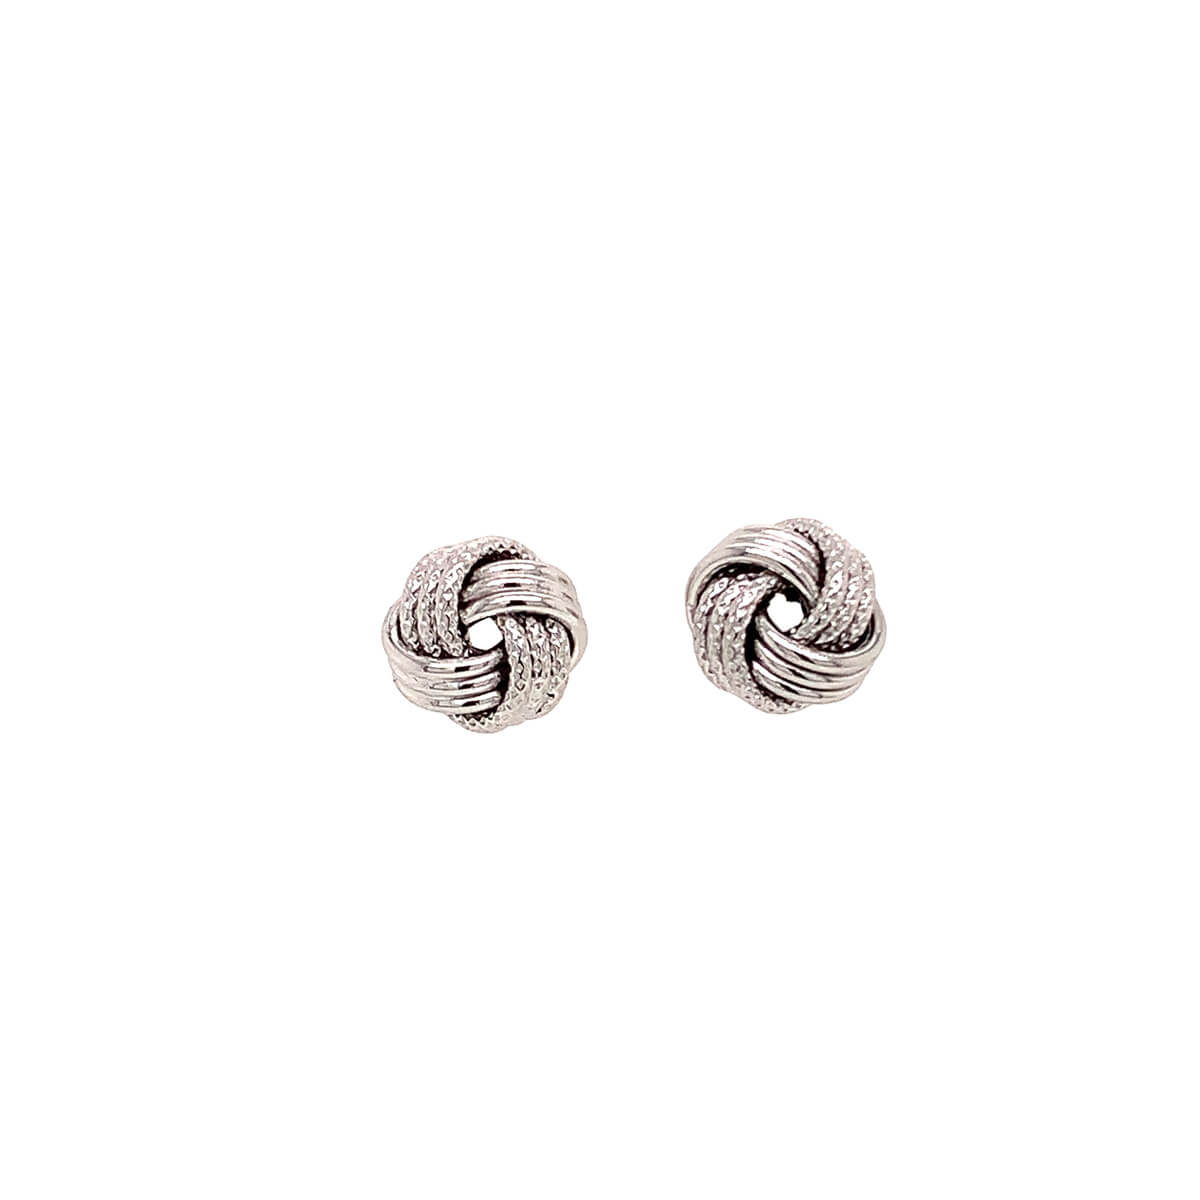 18ct White Gold Knot Earrings | Cry For The Moon